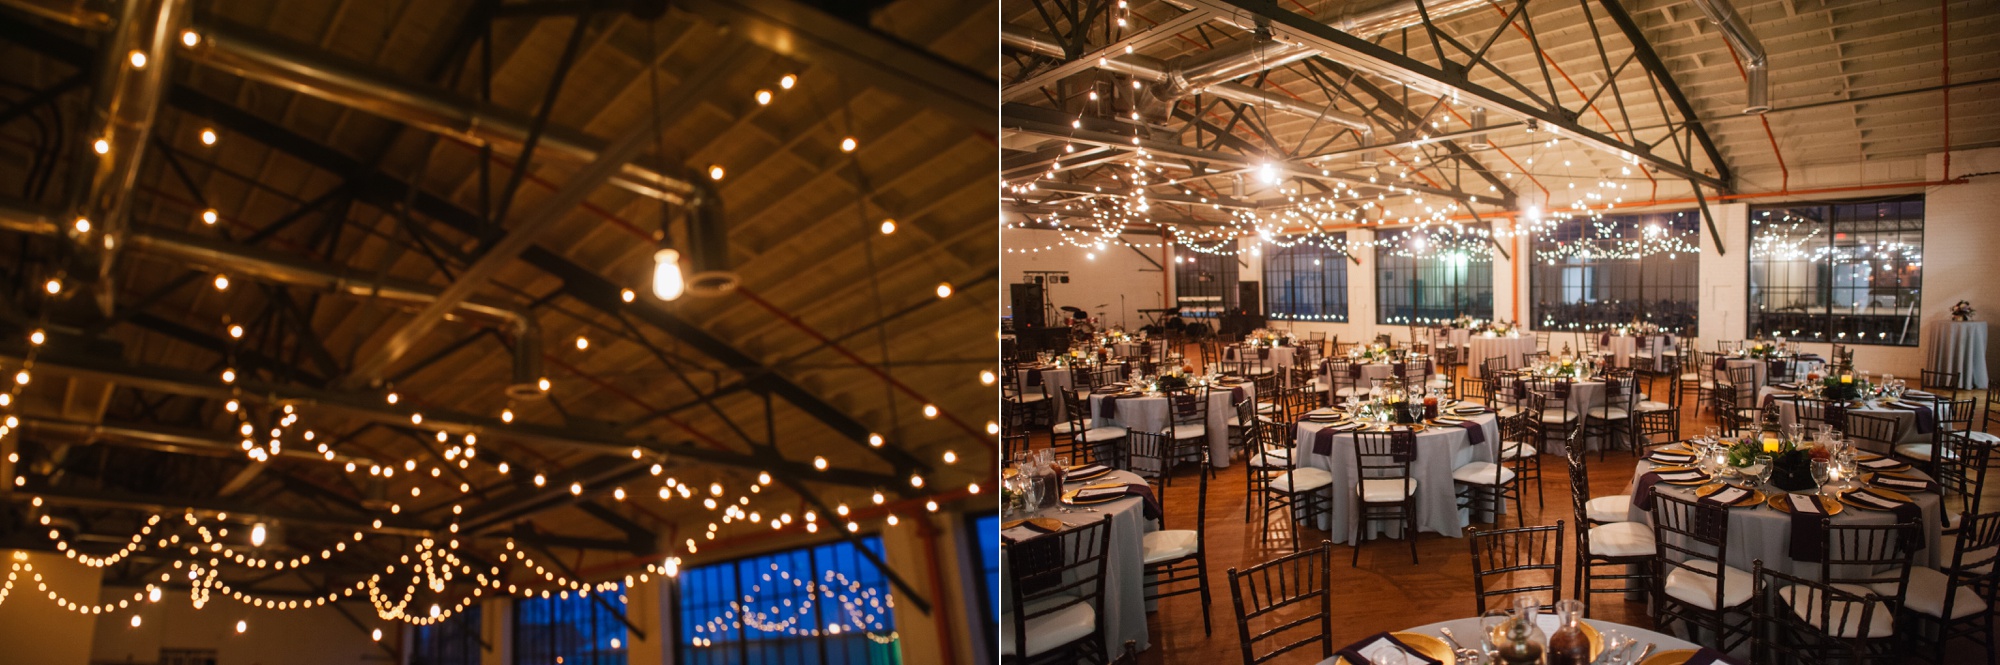 Amazing Wedding Reception Venues Louisville Ky of all time Check it out now 